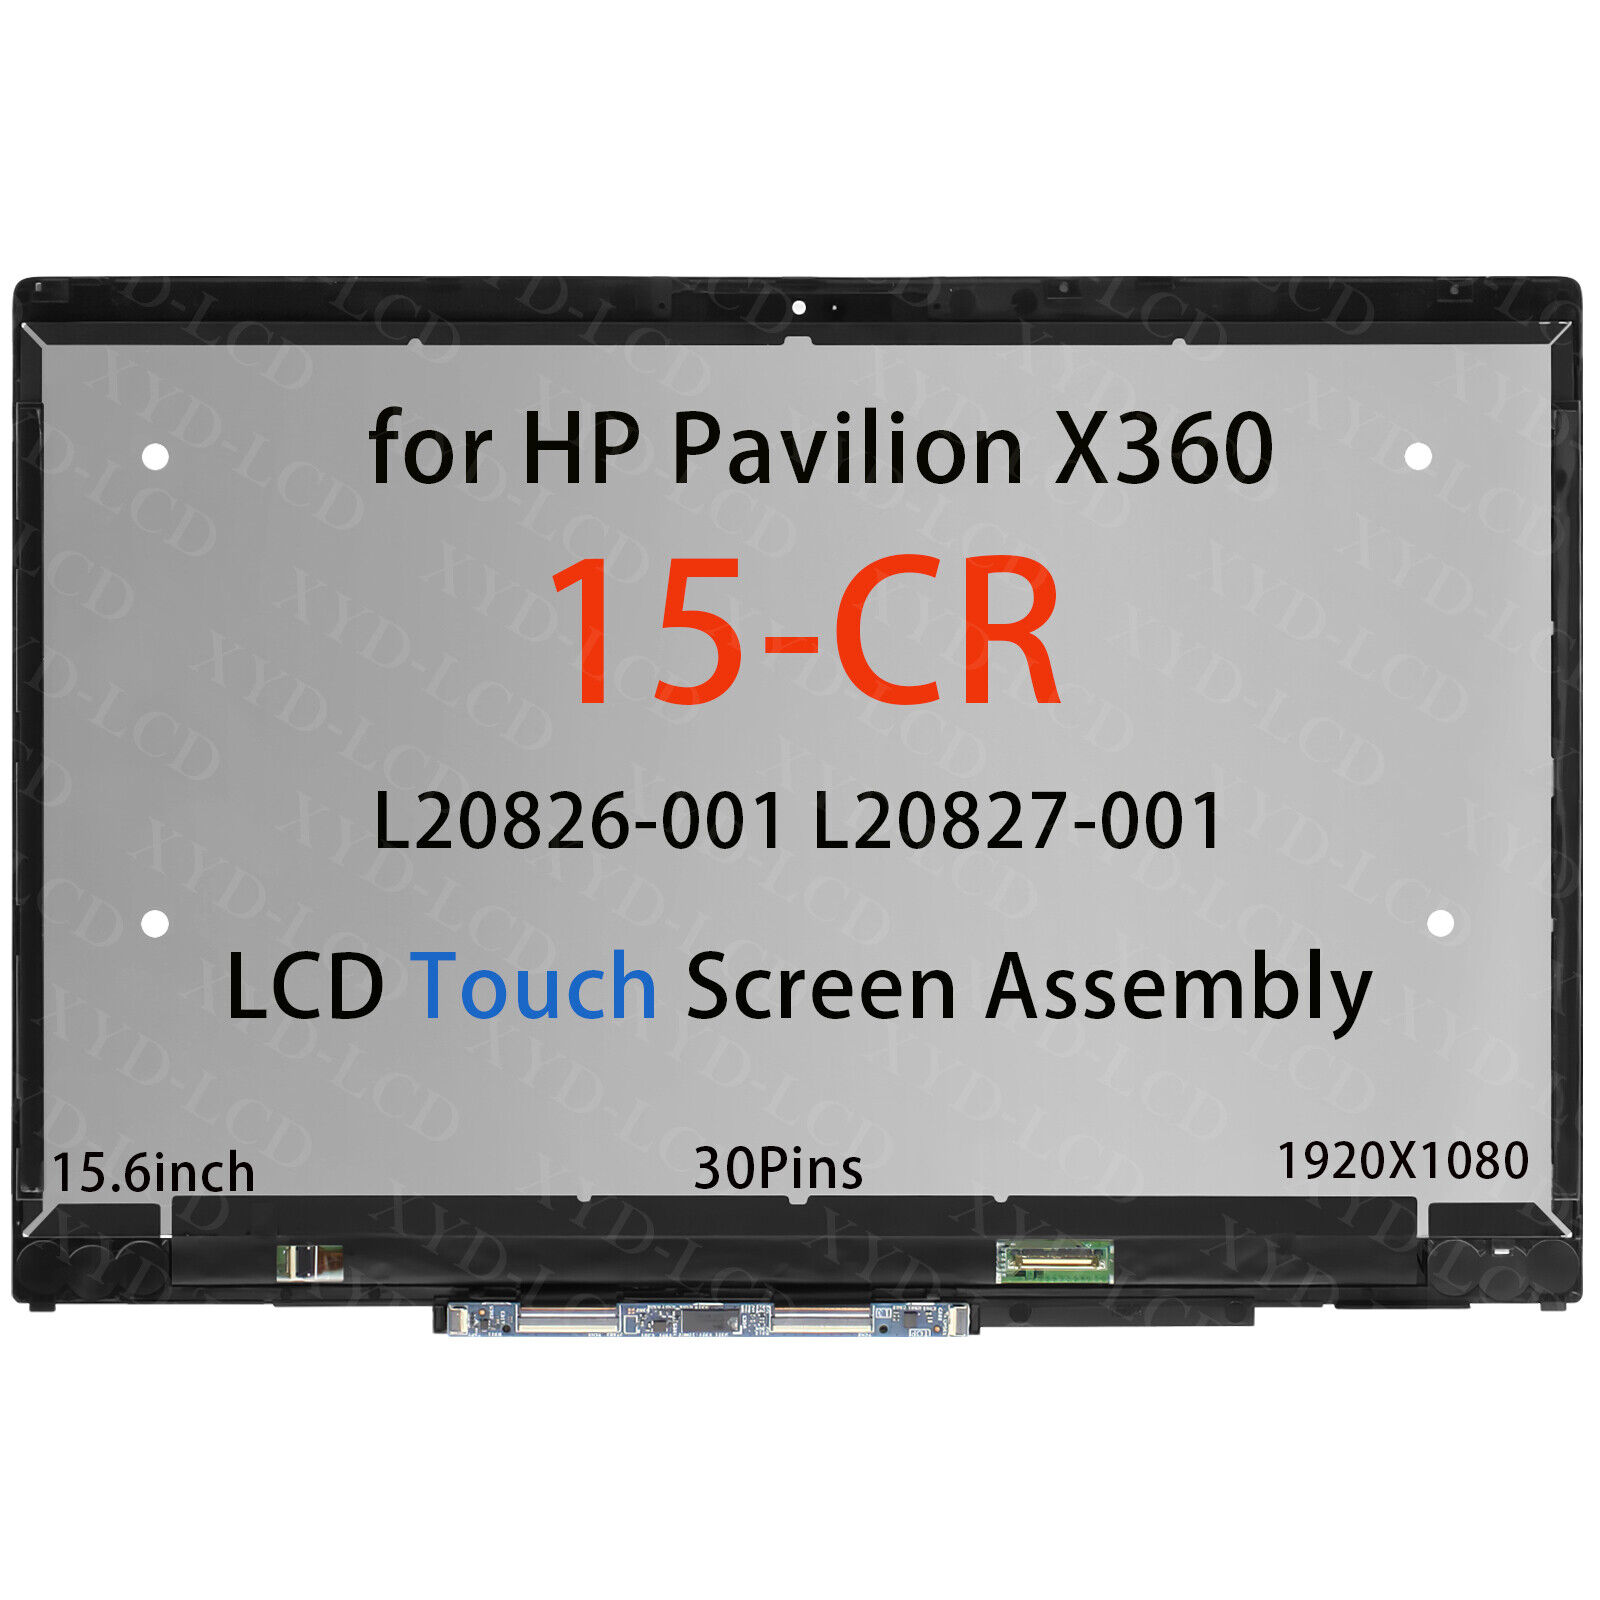 LCD Touch Screen Digitizer Assembly for HP Pavilion x360 15-CR0002NG L20826-001